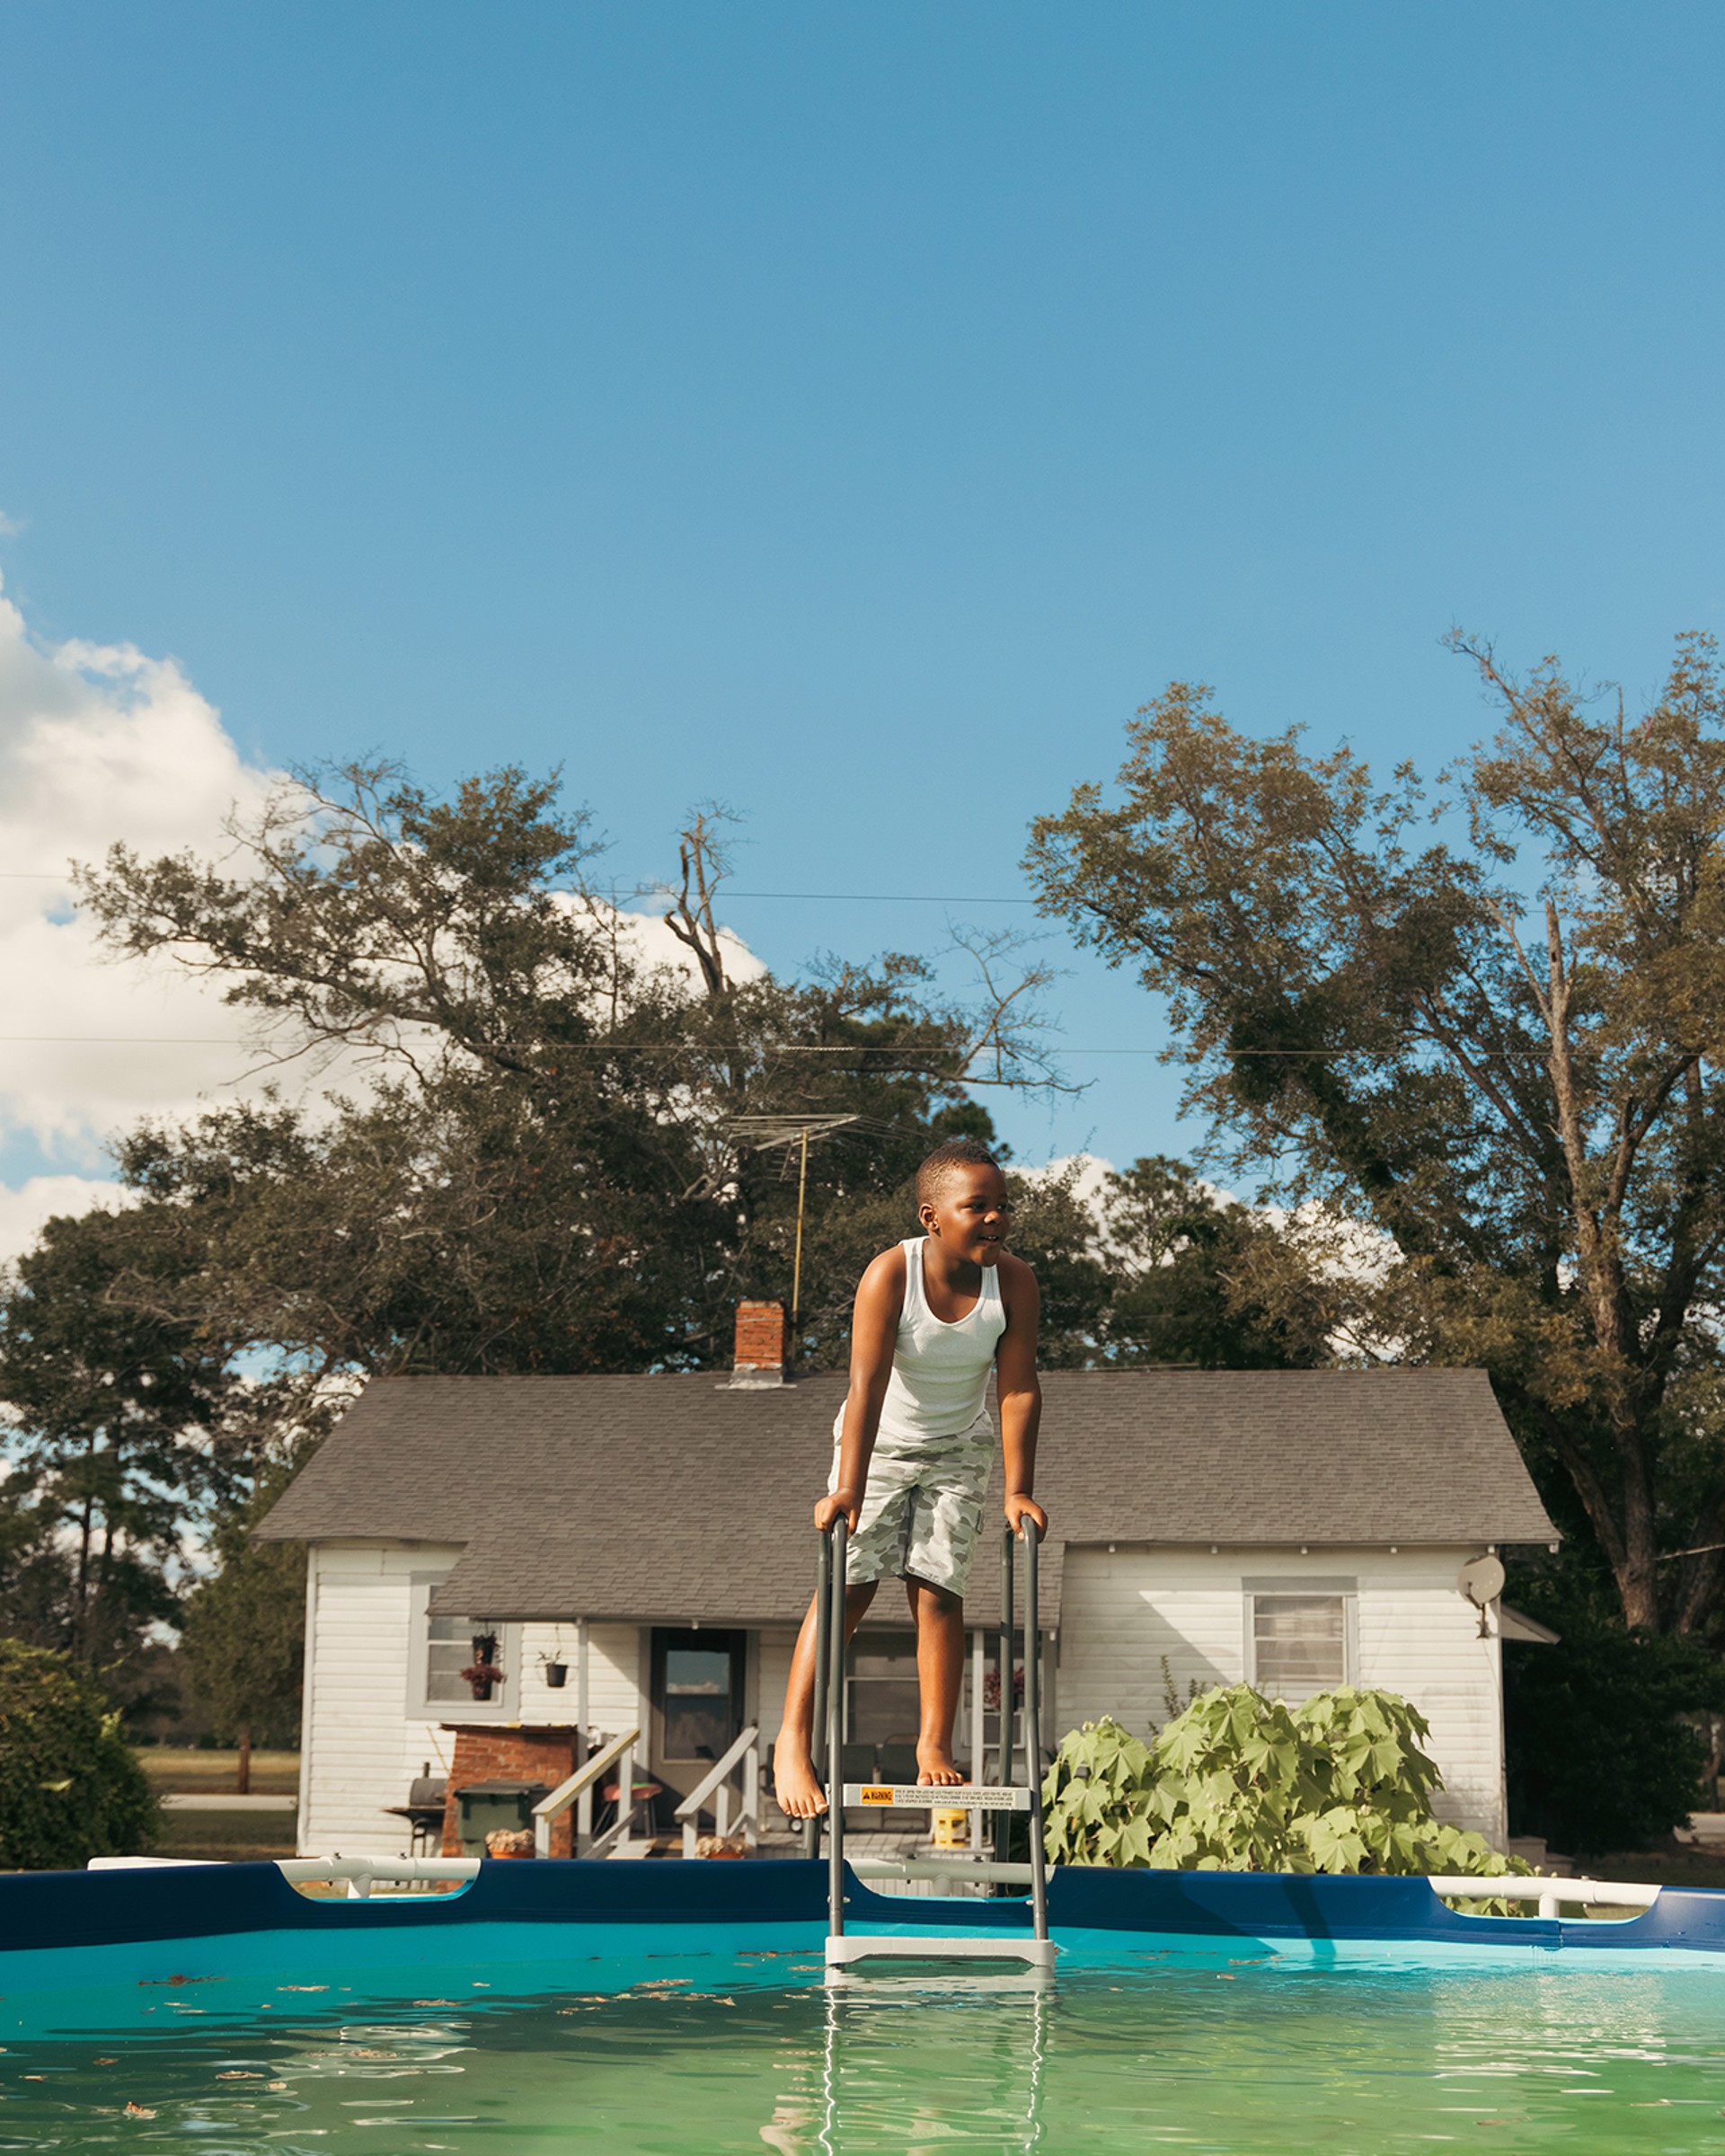 The Boy and the Pool by Taylor Edgerton